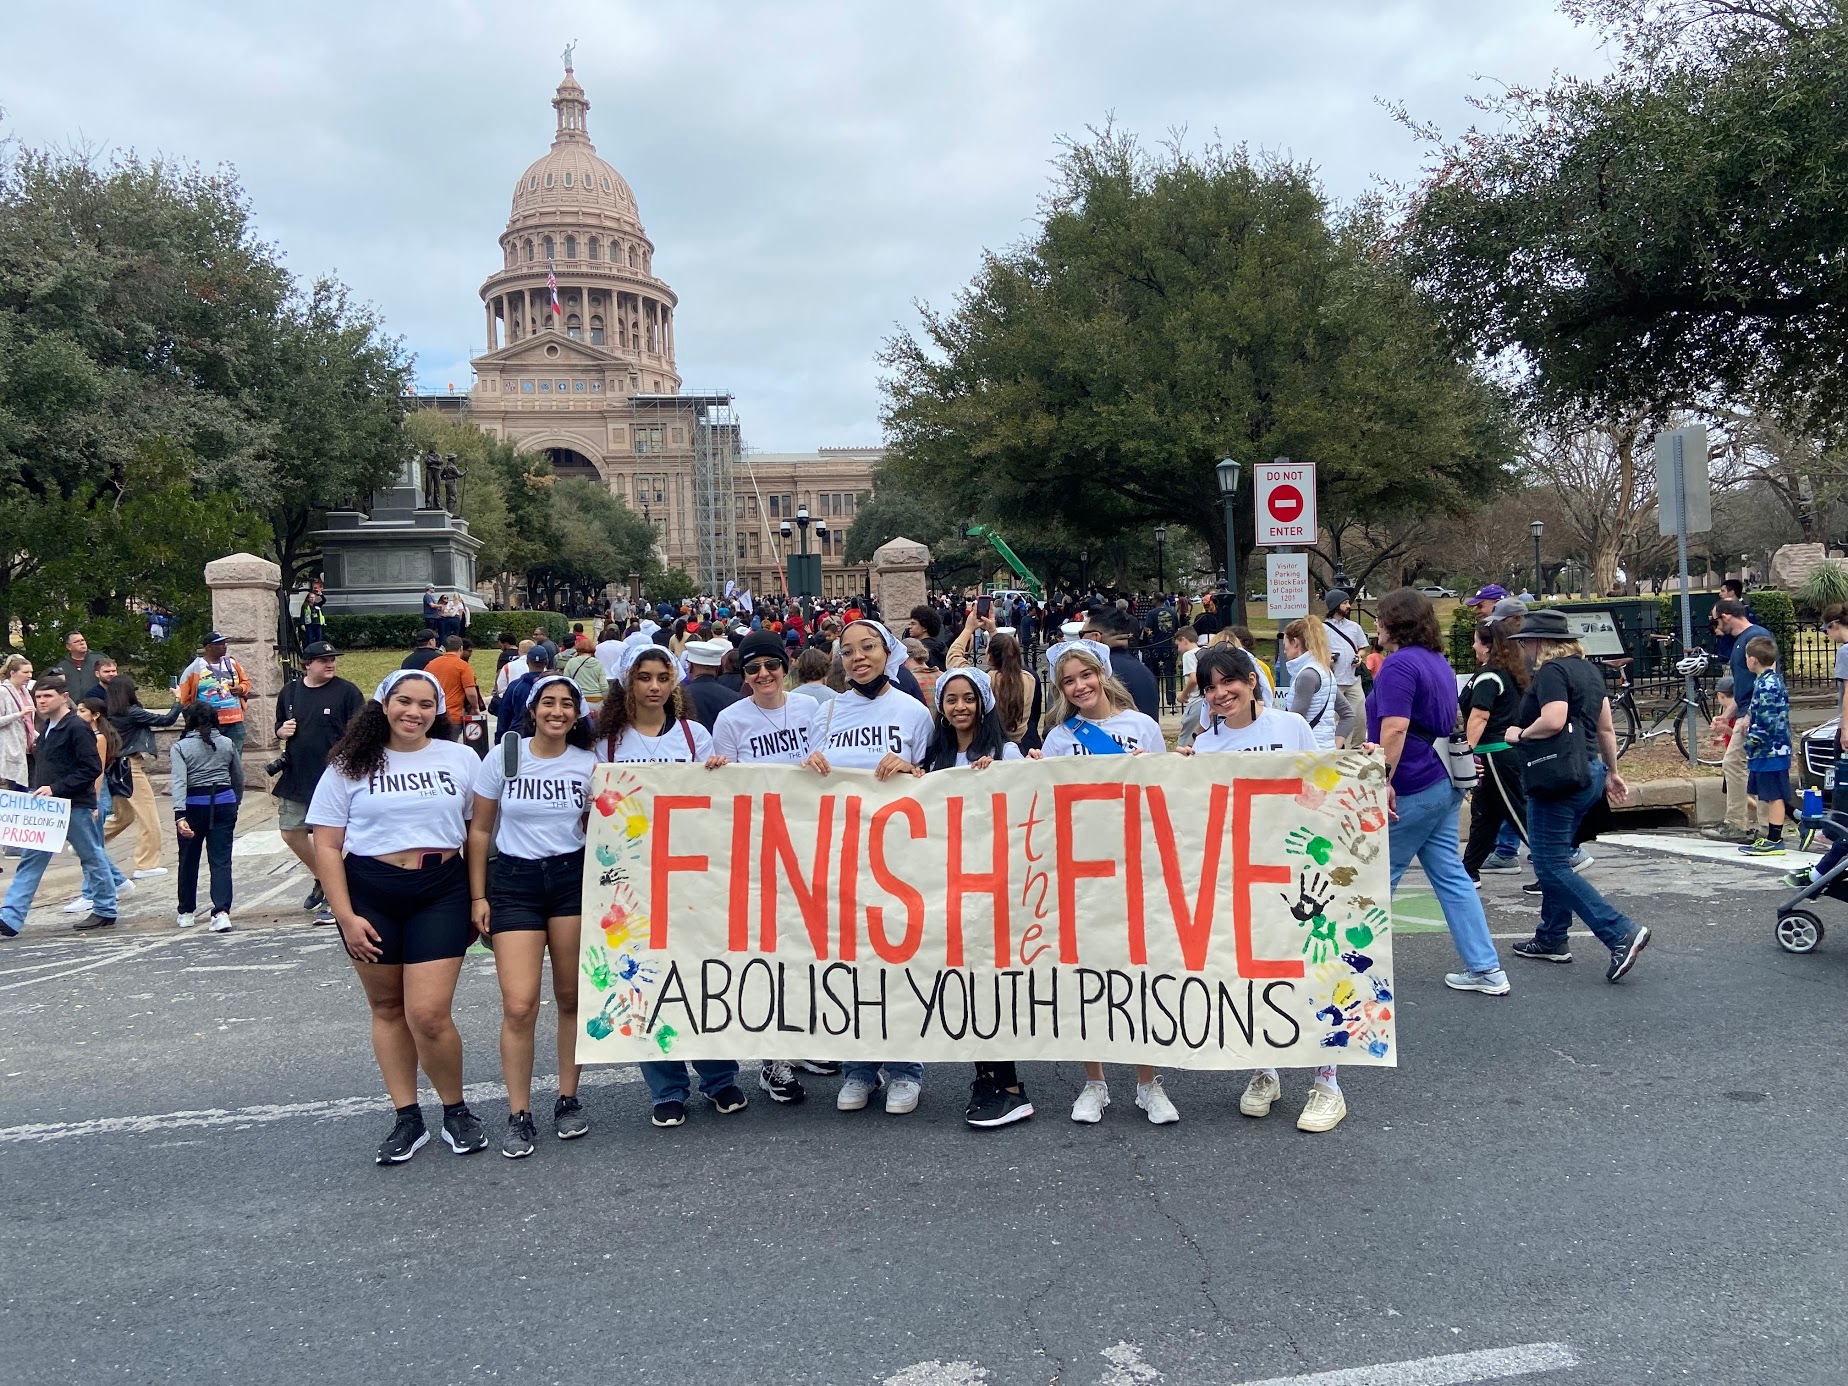 Finish the 5 coalition members with the campaign banner in front of the Texas Capitol